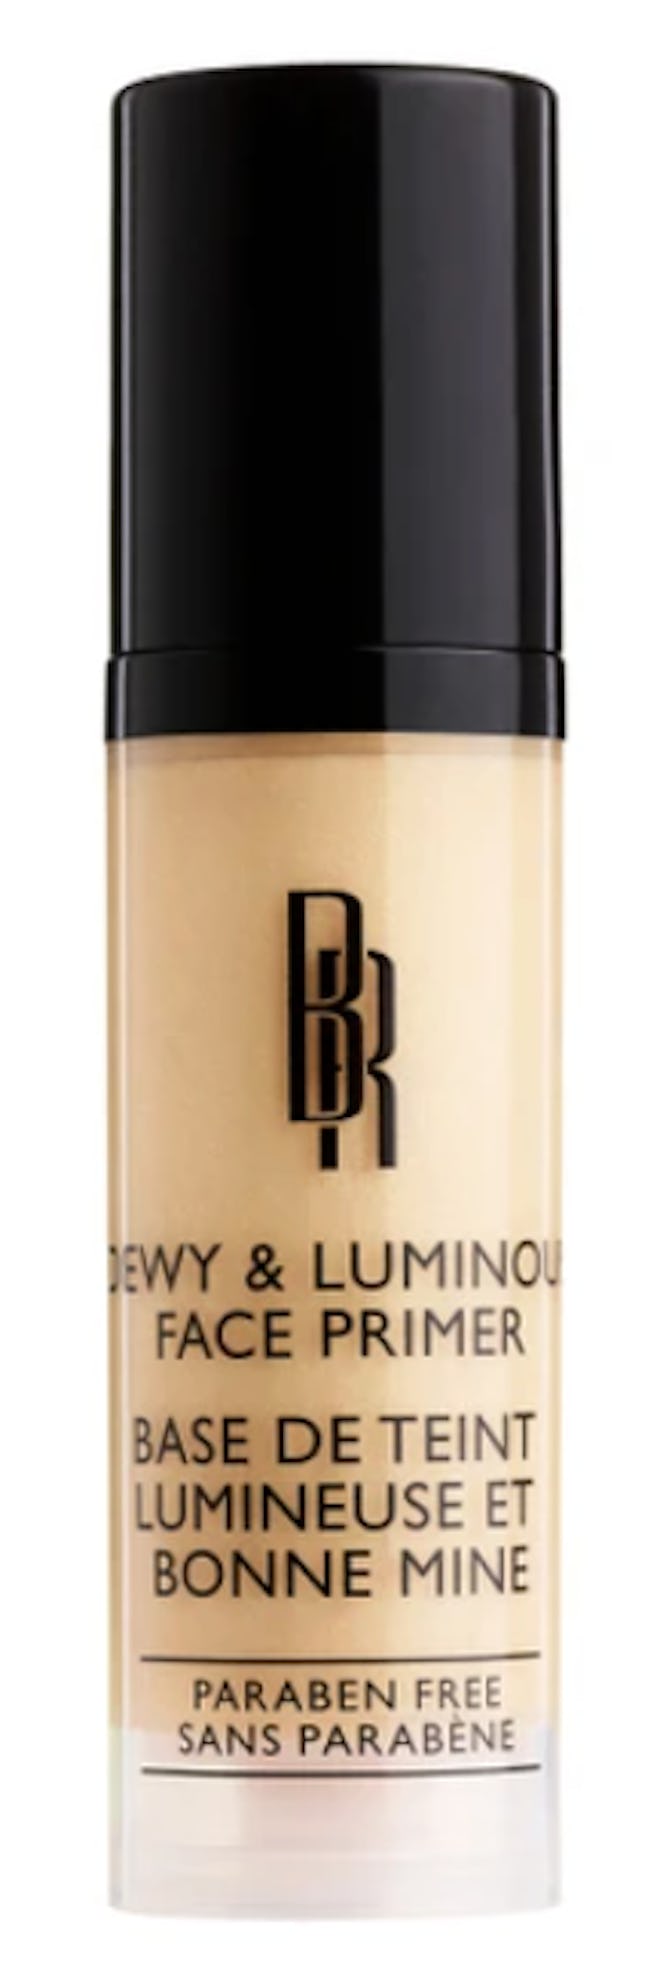   Black Radiance’s Dewy and Luminous Face Primer for cakey makeup